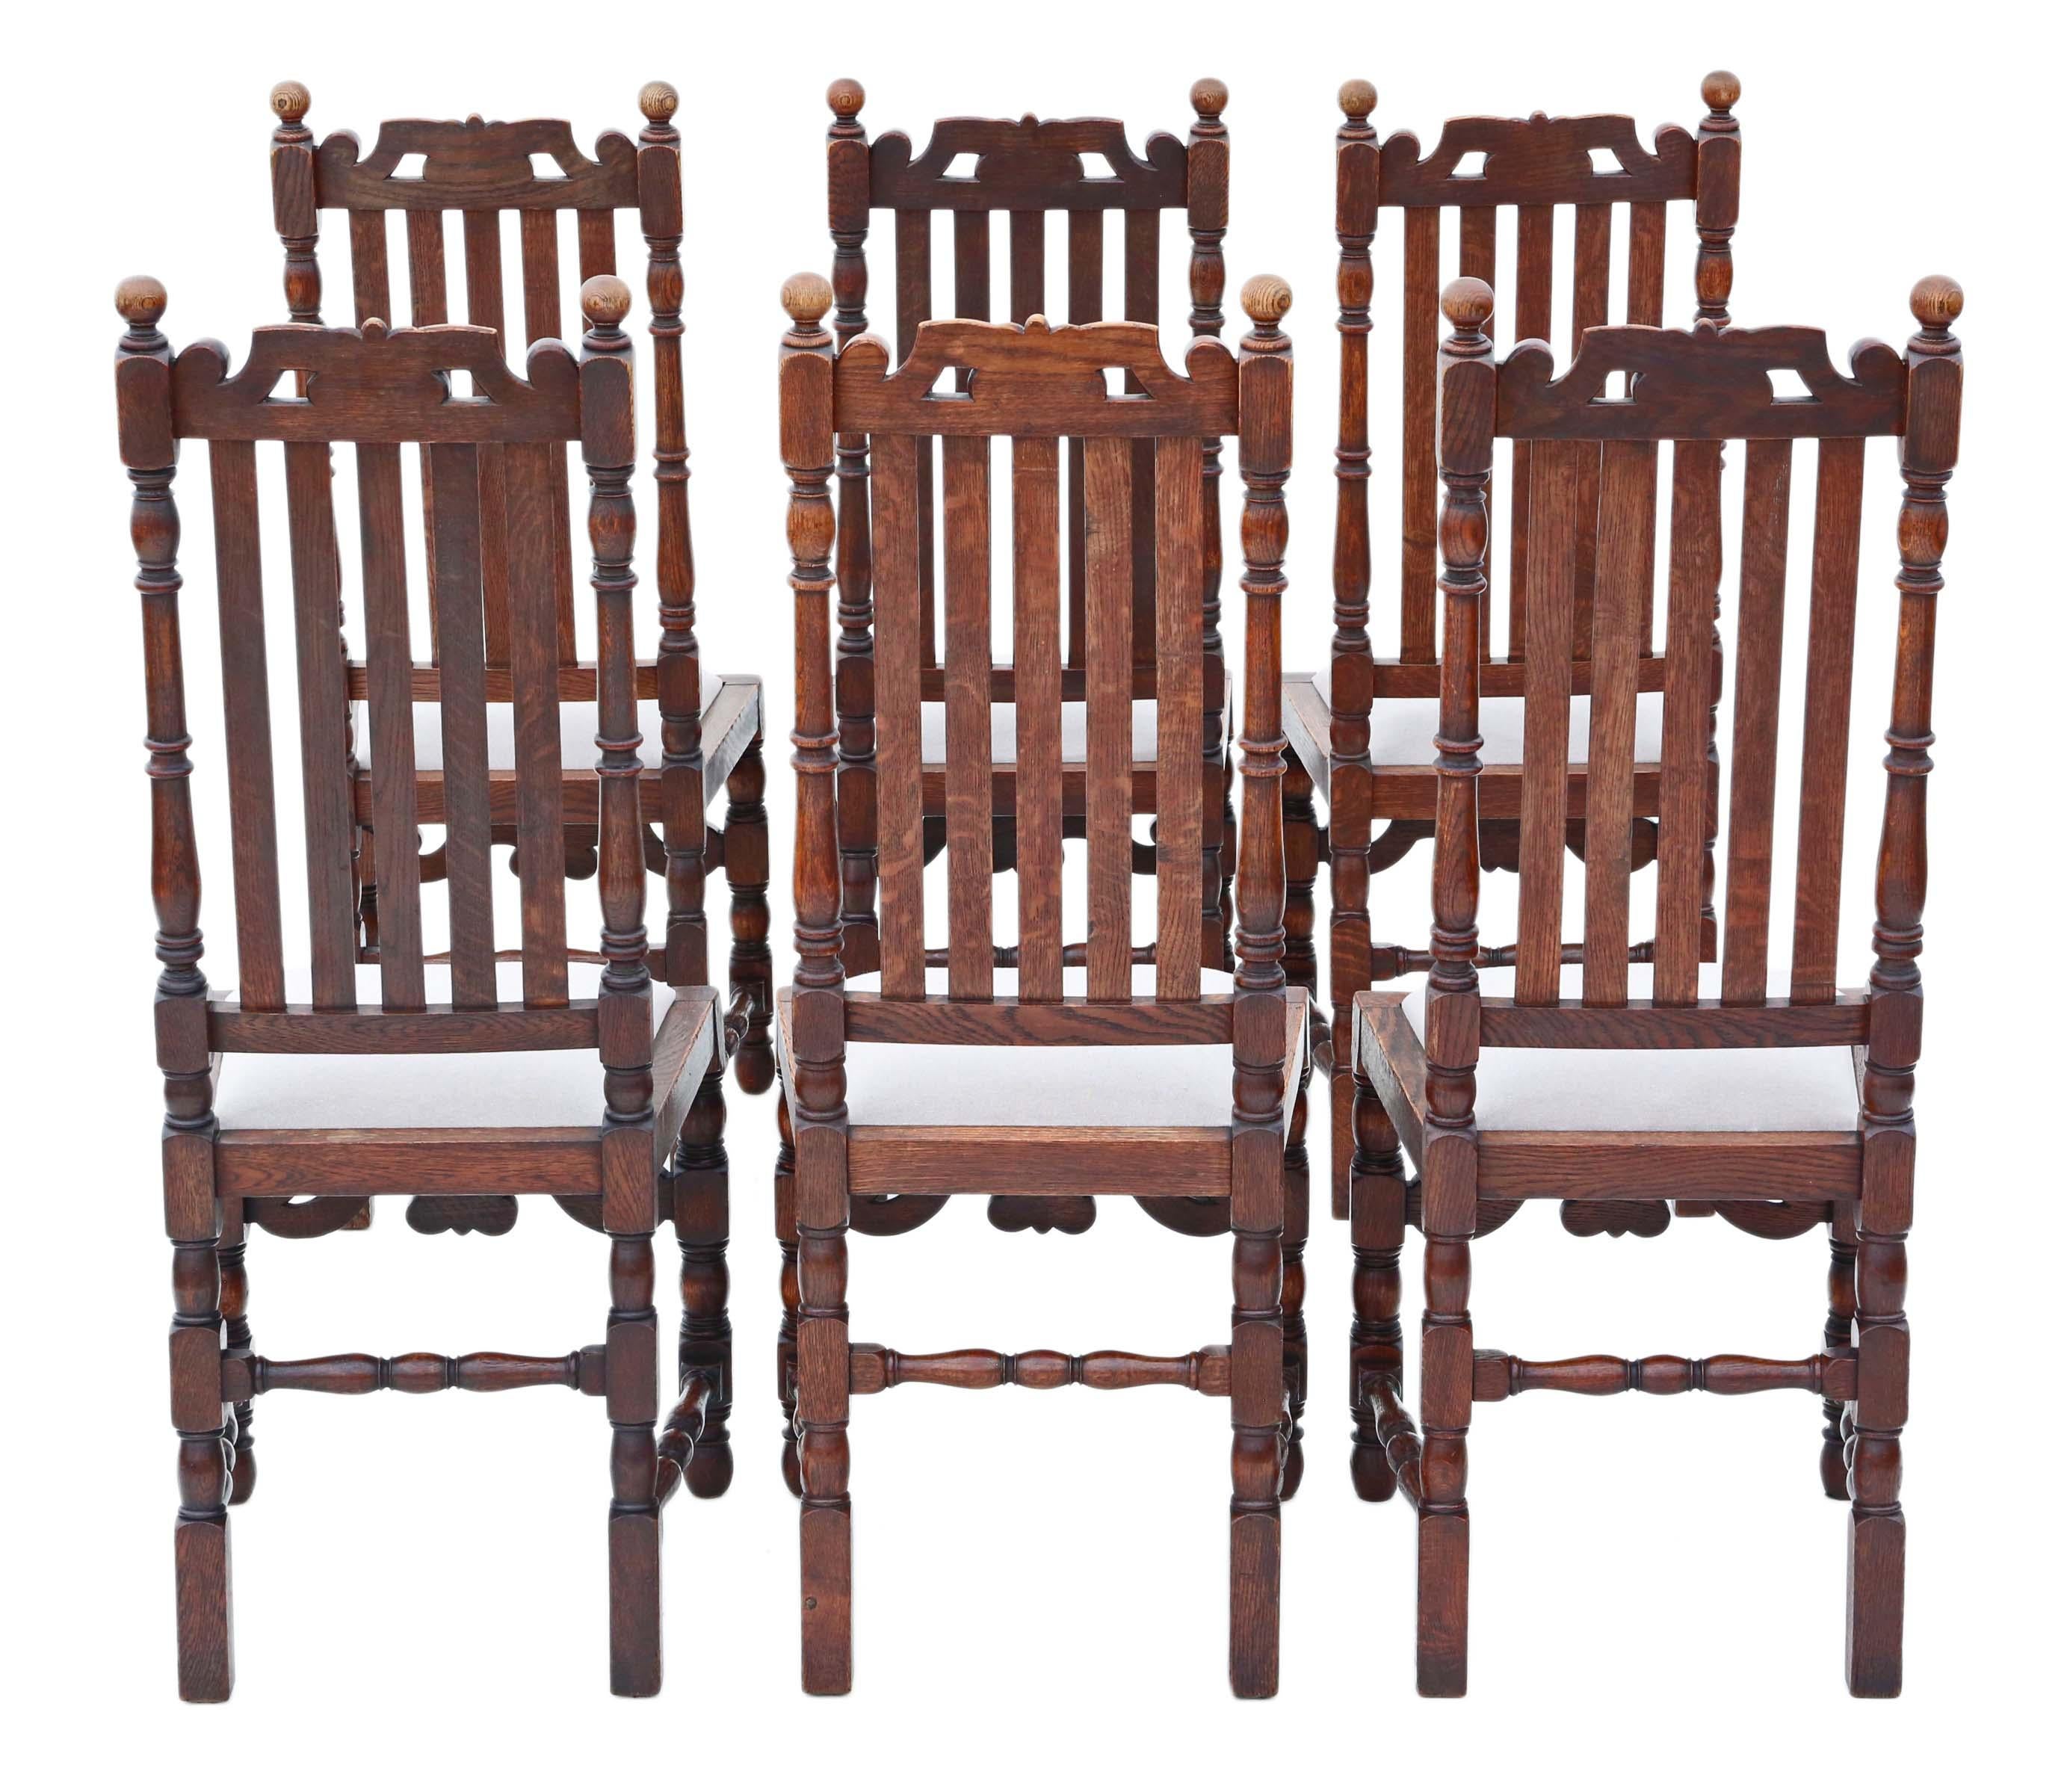 Antique quality set of 6 oak dining chairs C1915 Charles II style.

Solid, heavy and strong, with no loose joints or woodworm. Full of age, character and charm. Very decorative high back chairs.

Would look great in the right